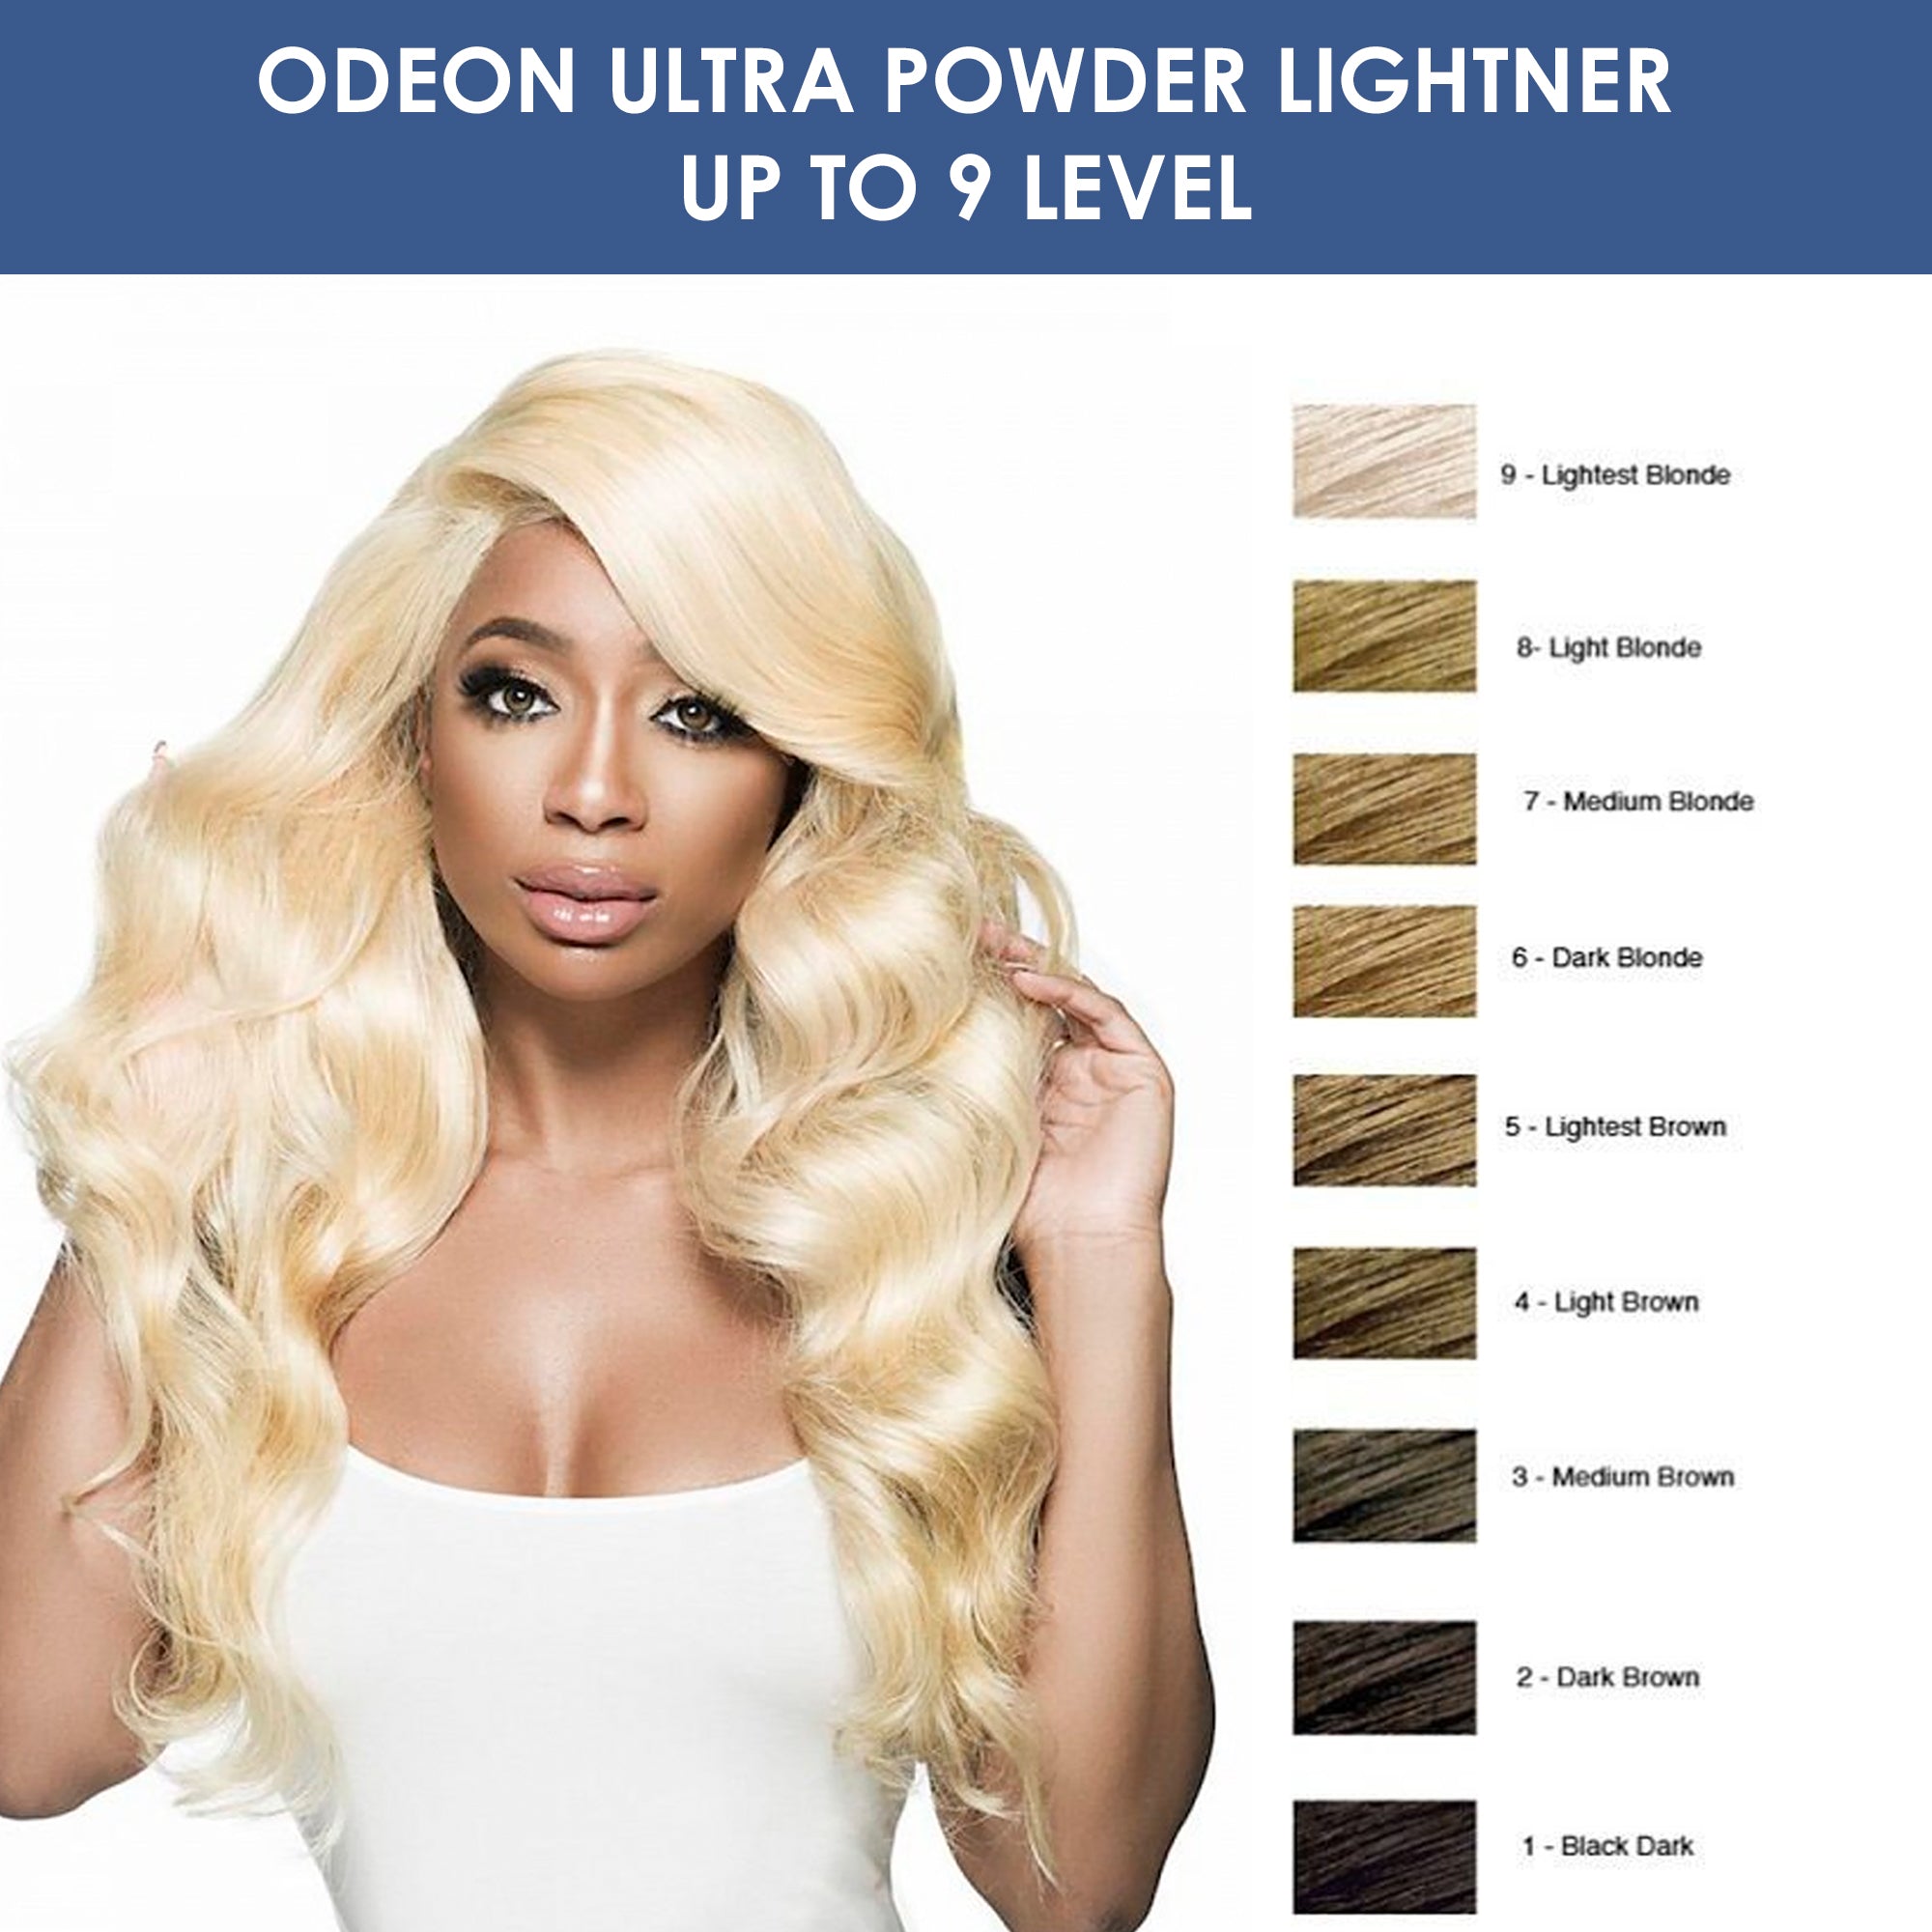 Odeon Professional Ultra-Lifting Powder Lightener Up to 9 Levels with Mixing Bowl and Dye Brush 4oz (118g)